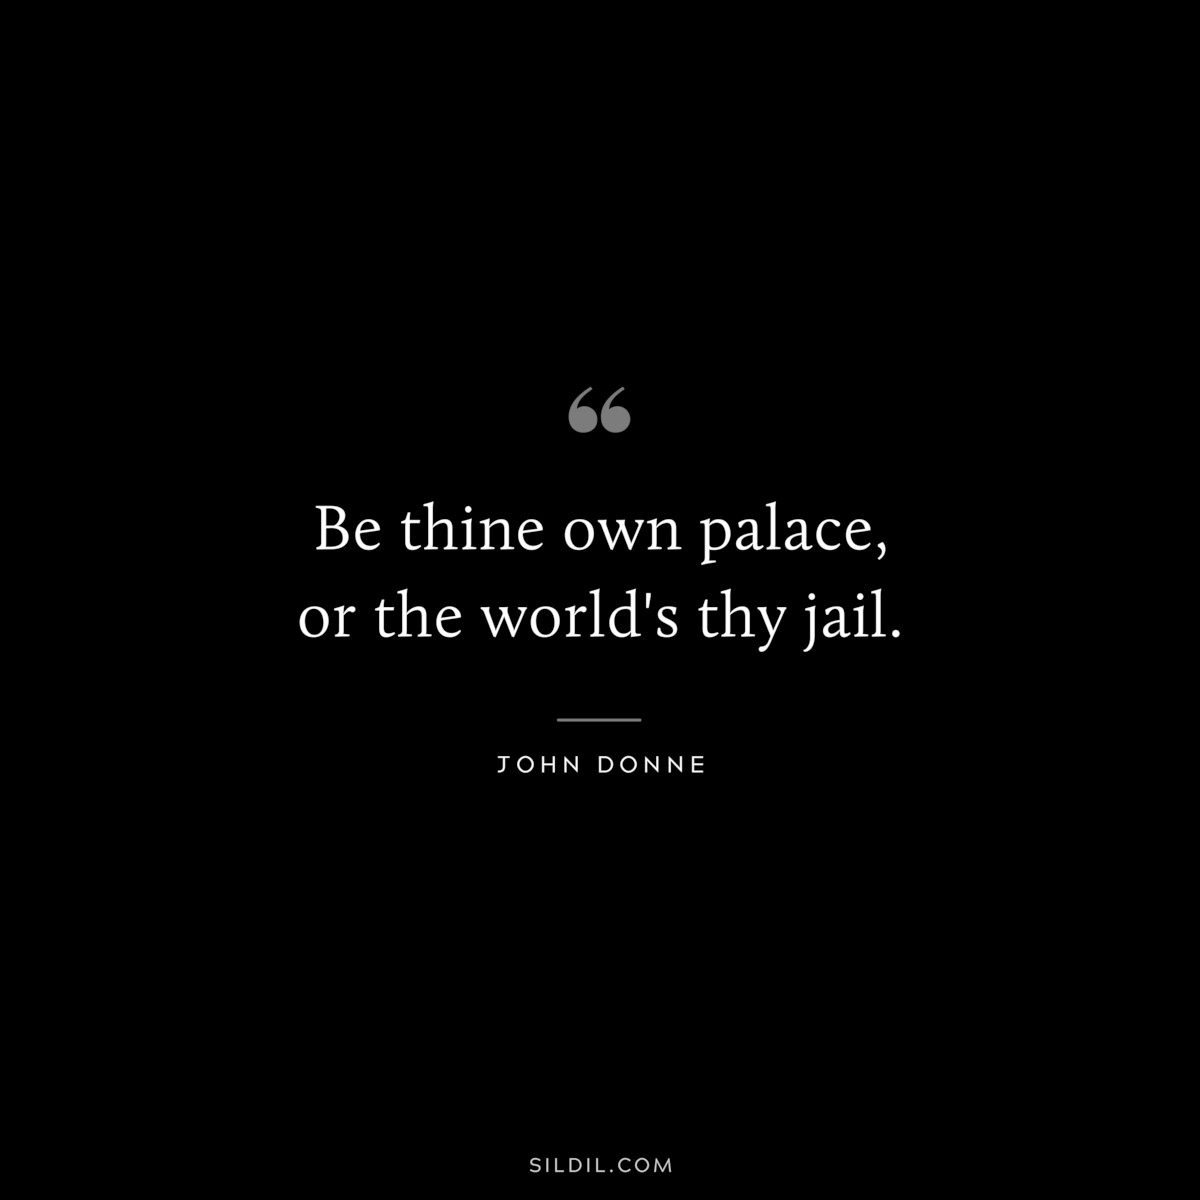 Be thine own palace, or the world's thy jail. ― John Donne